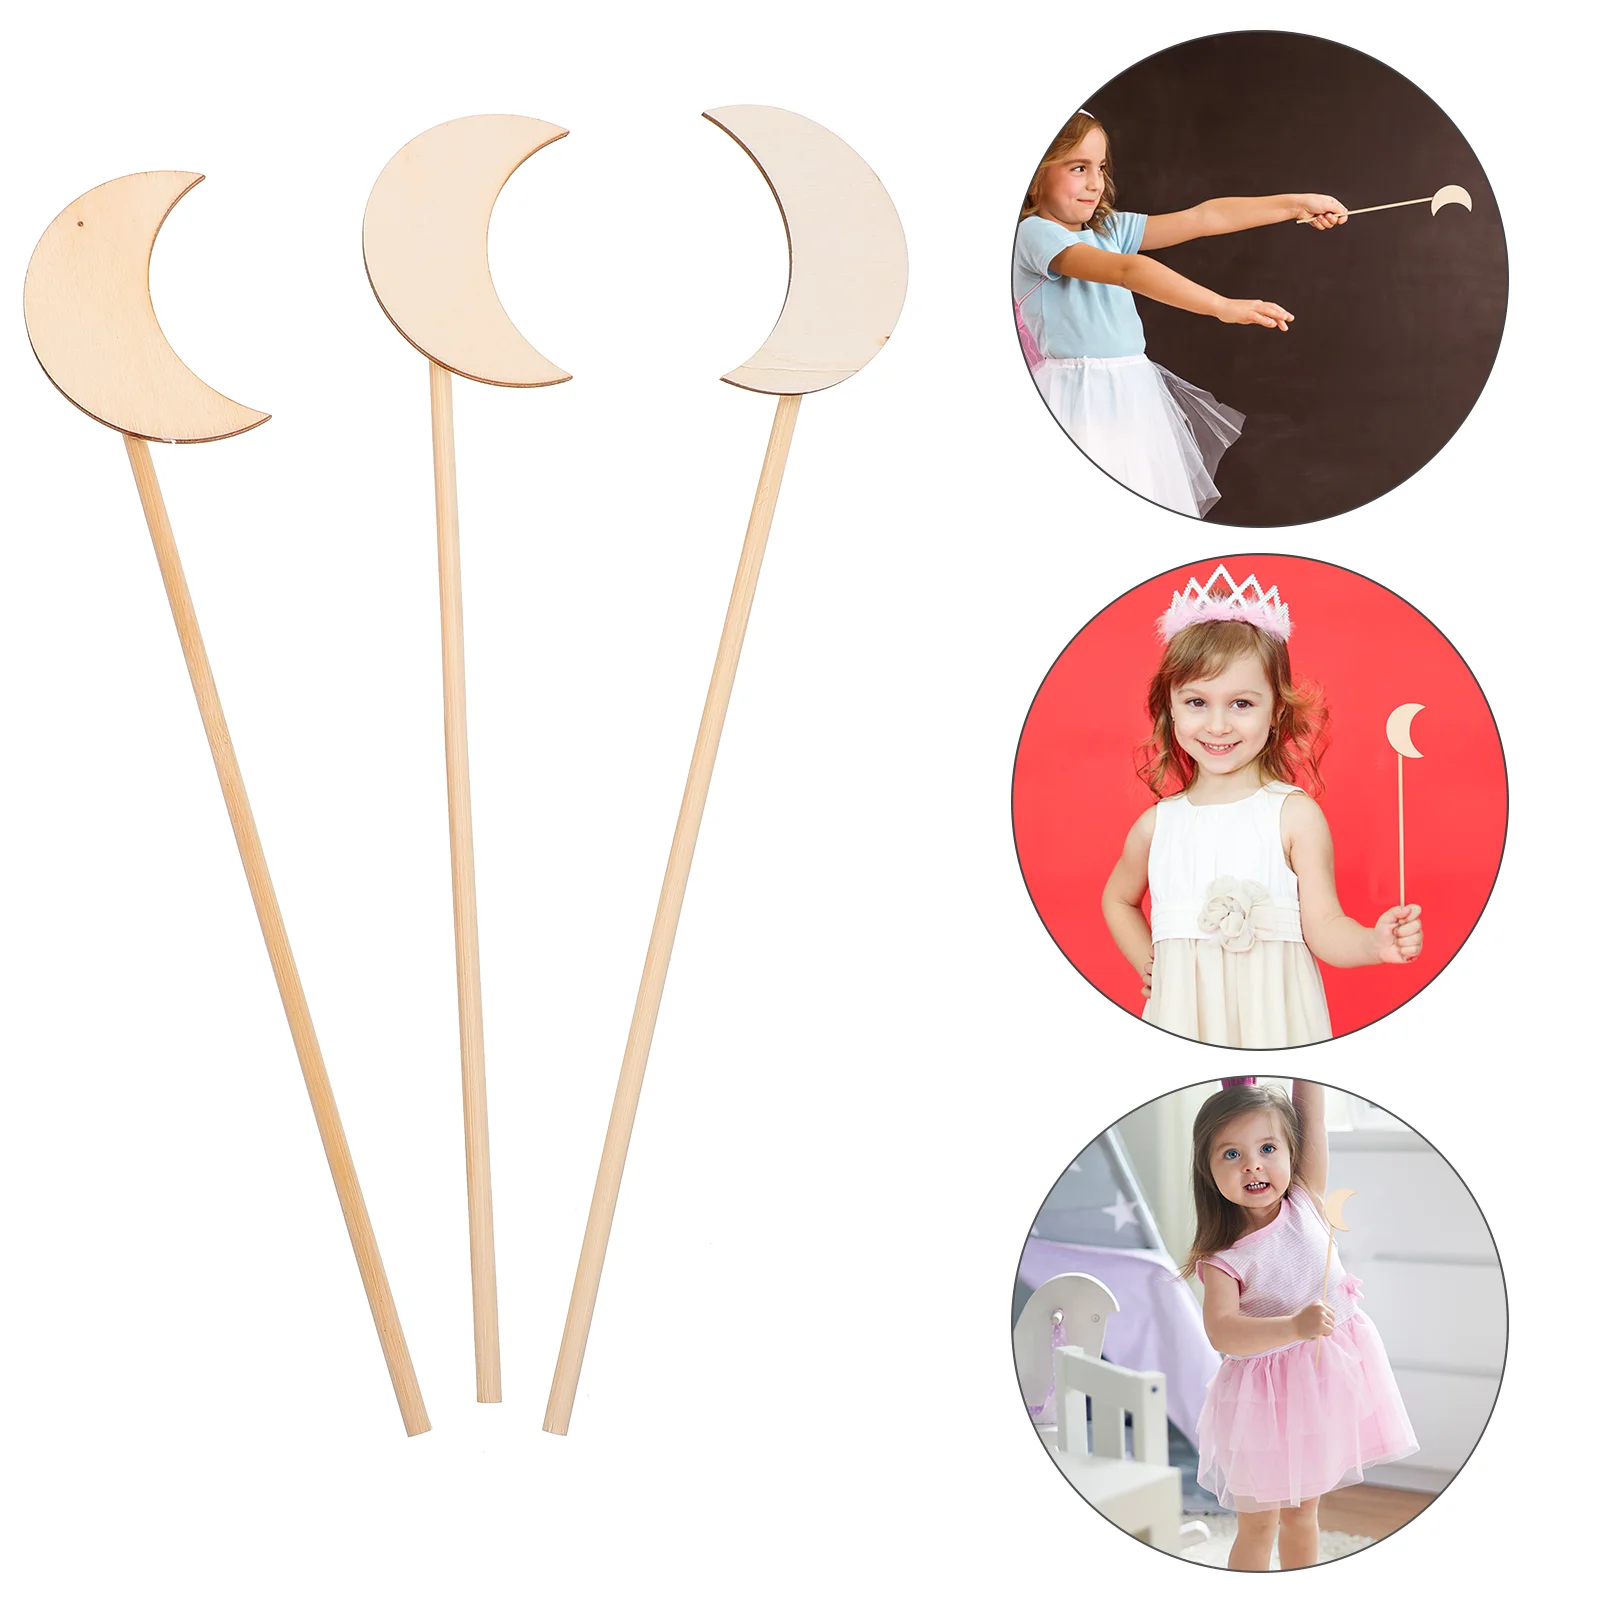 

Fairy Wand Stick Toy Diy Wooden Wands Drawing Wood Kids Unfinished Blank Graffiti Painting Unpainted Crafts Magical Sticks